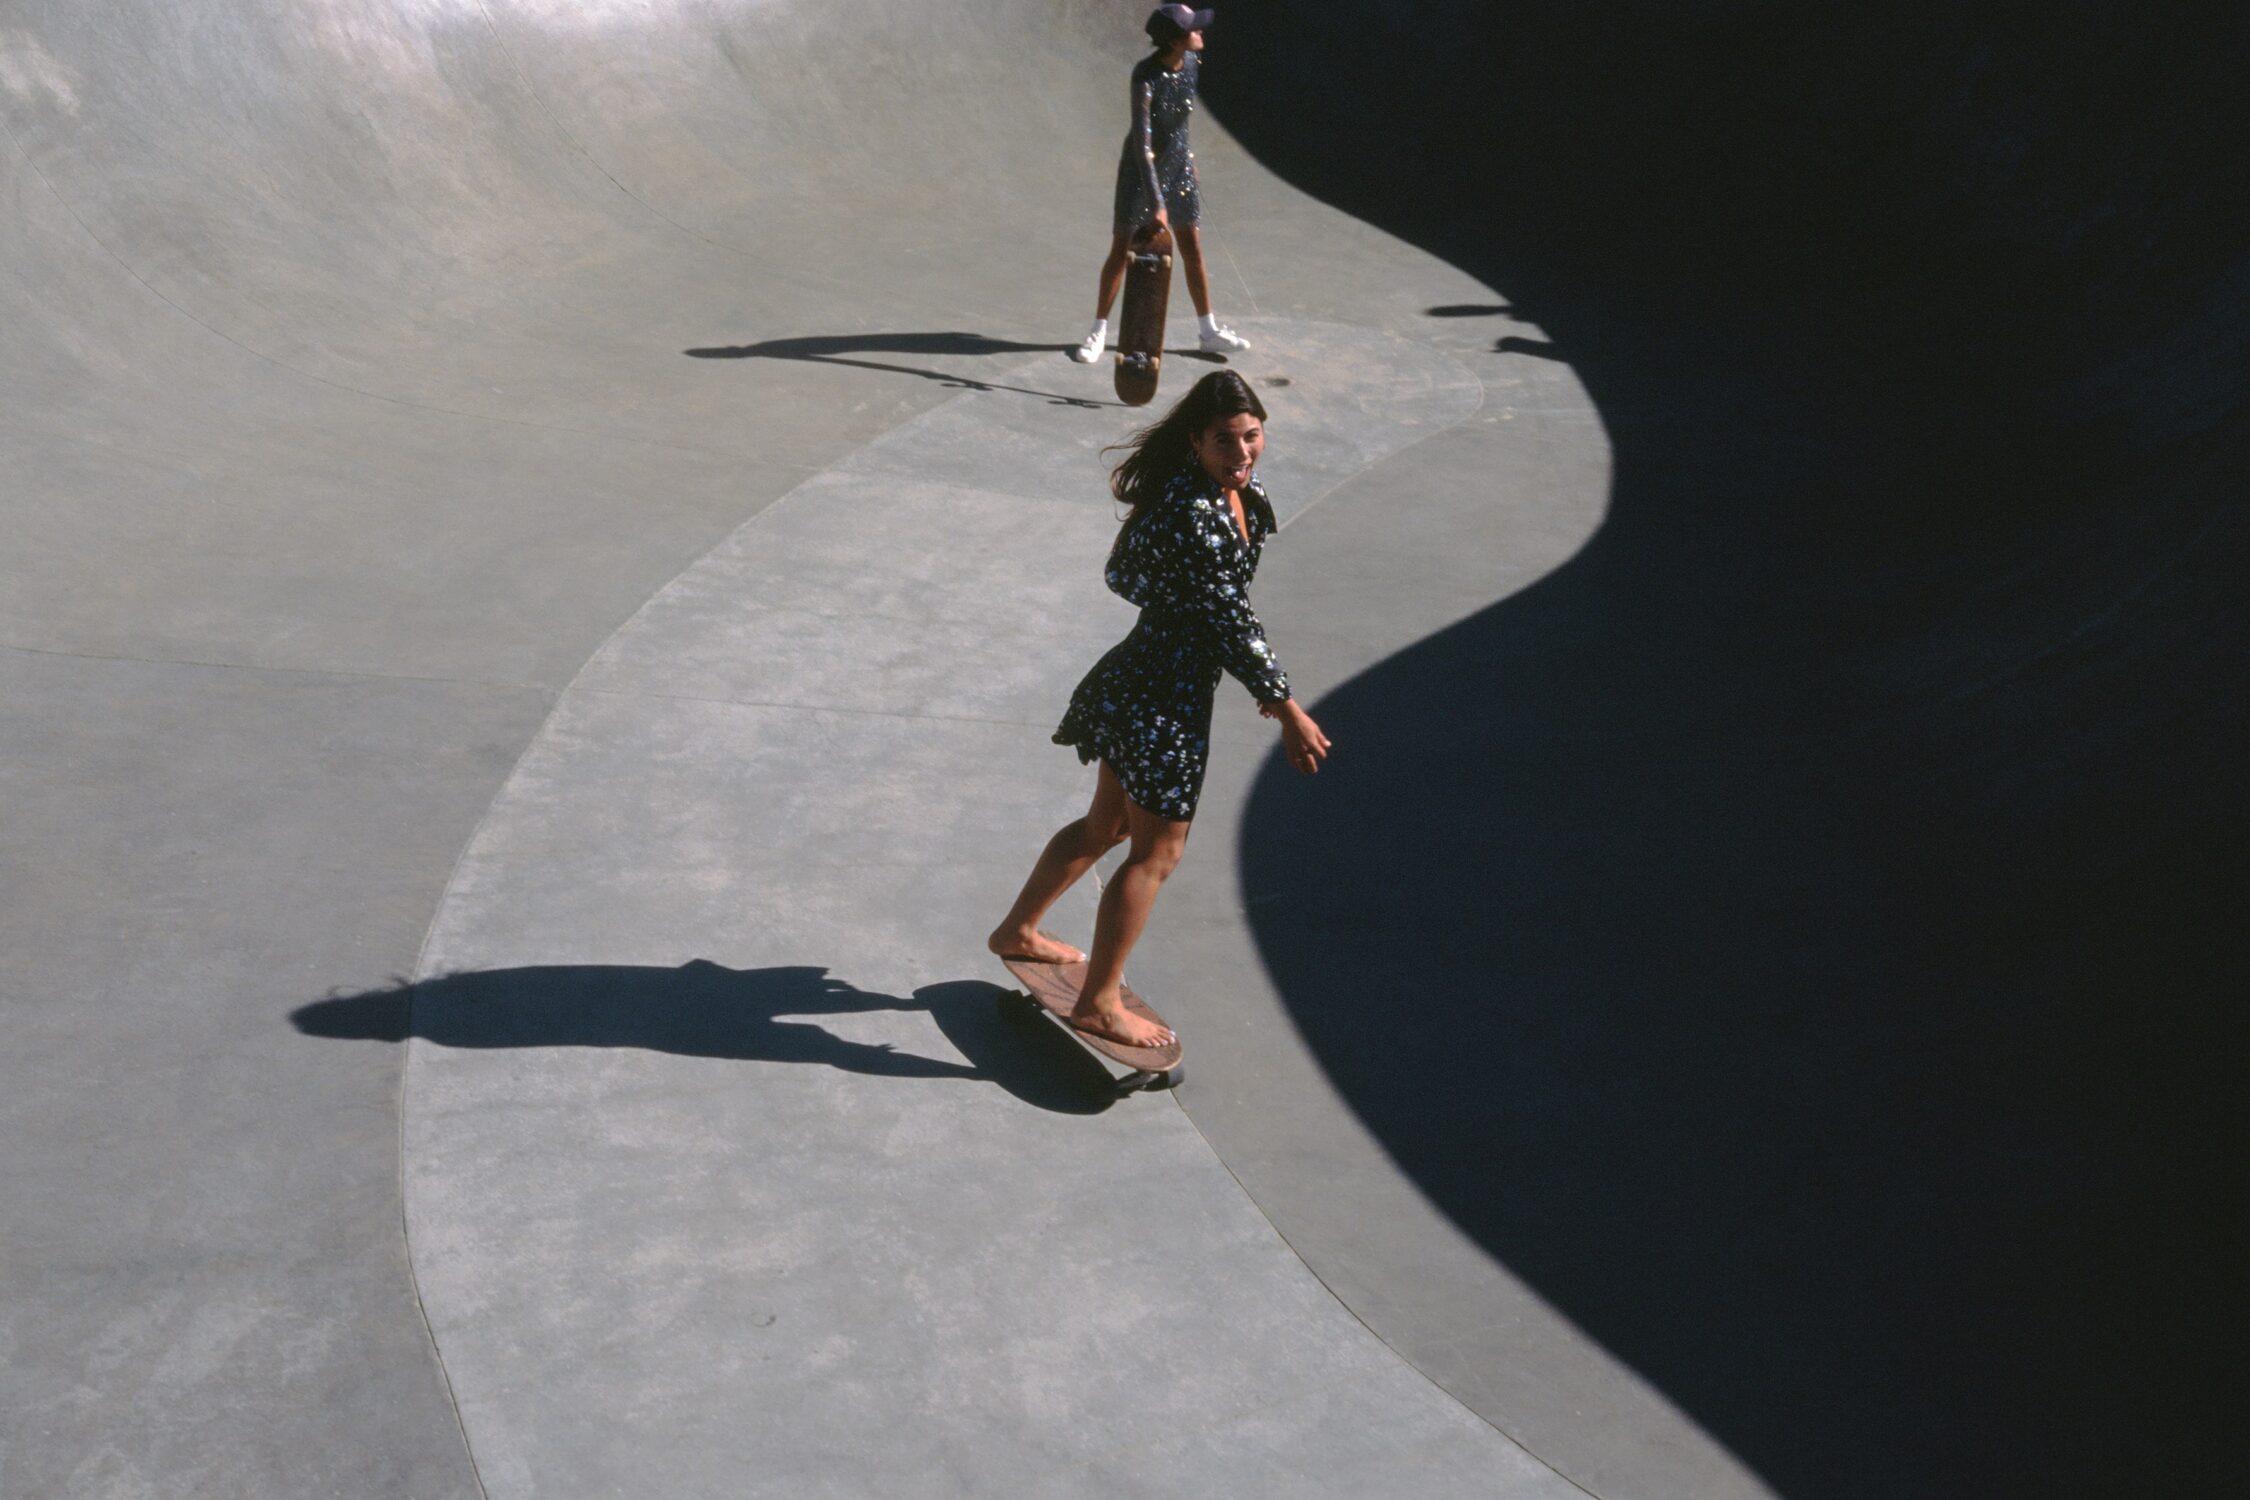 Grlswirl Skateboarding collective member Val LaForge in the Venice Beach, California bowl